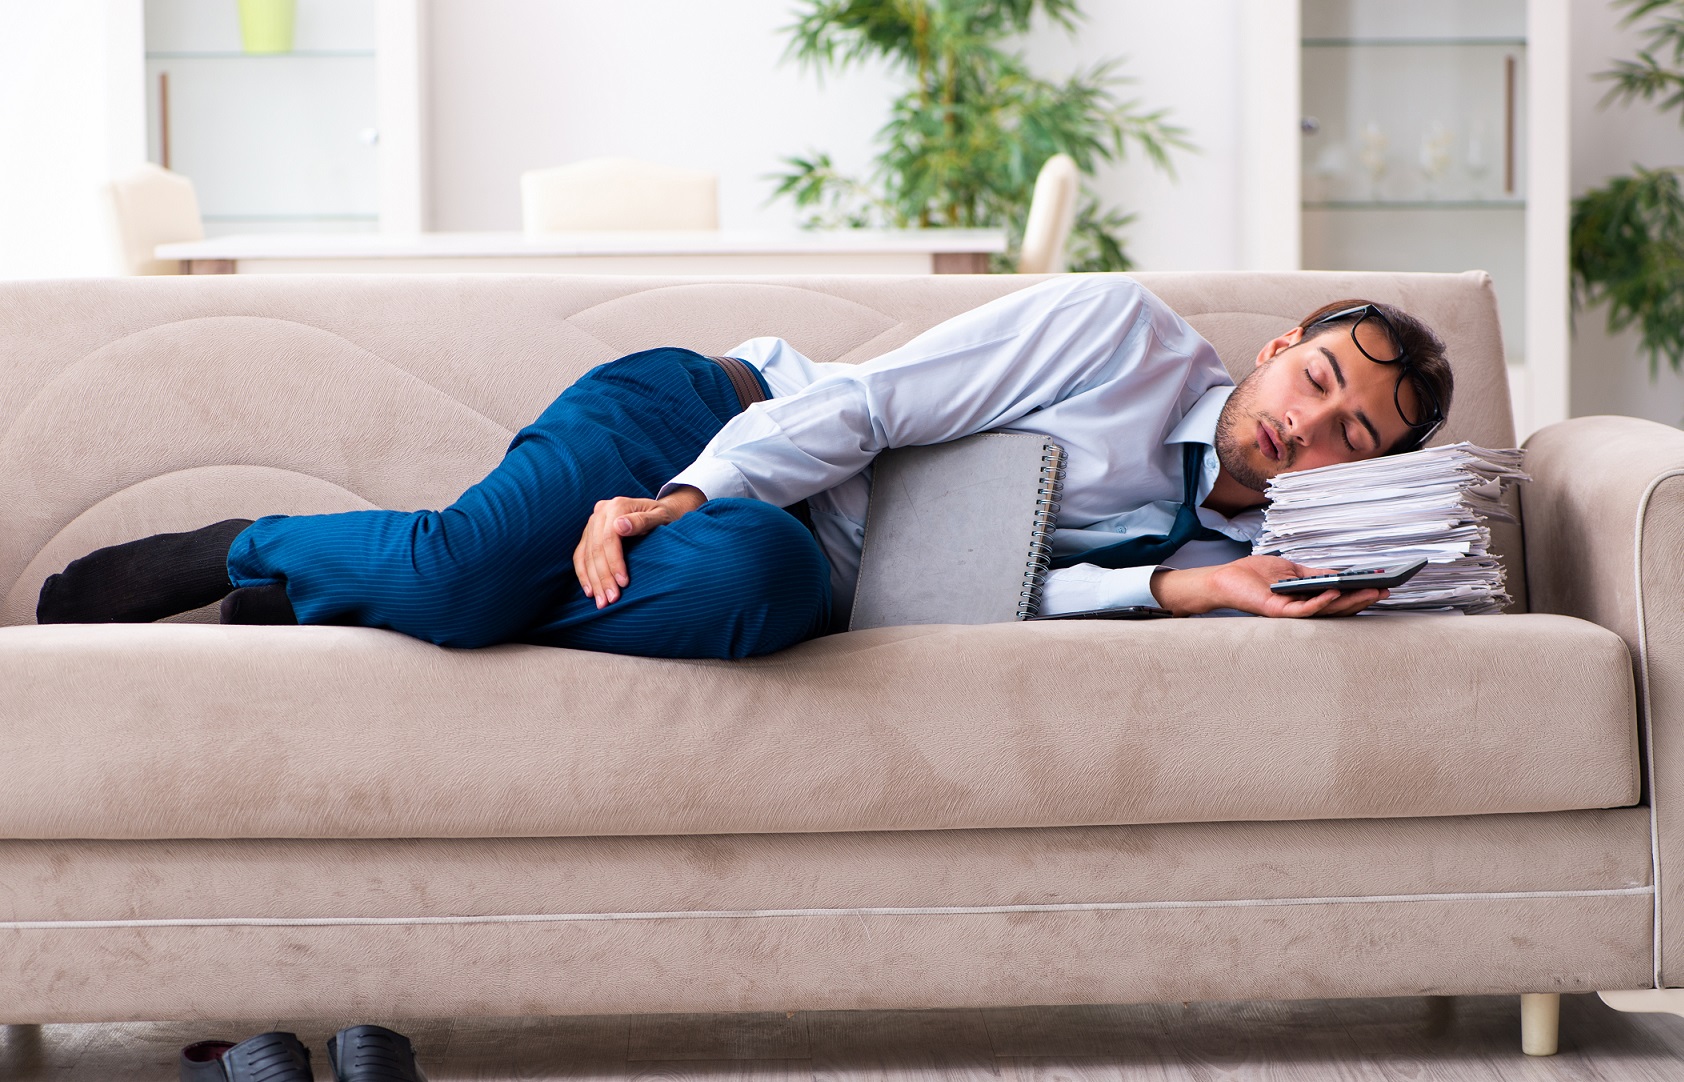 How to Sleep Well While Working From Home?